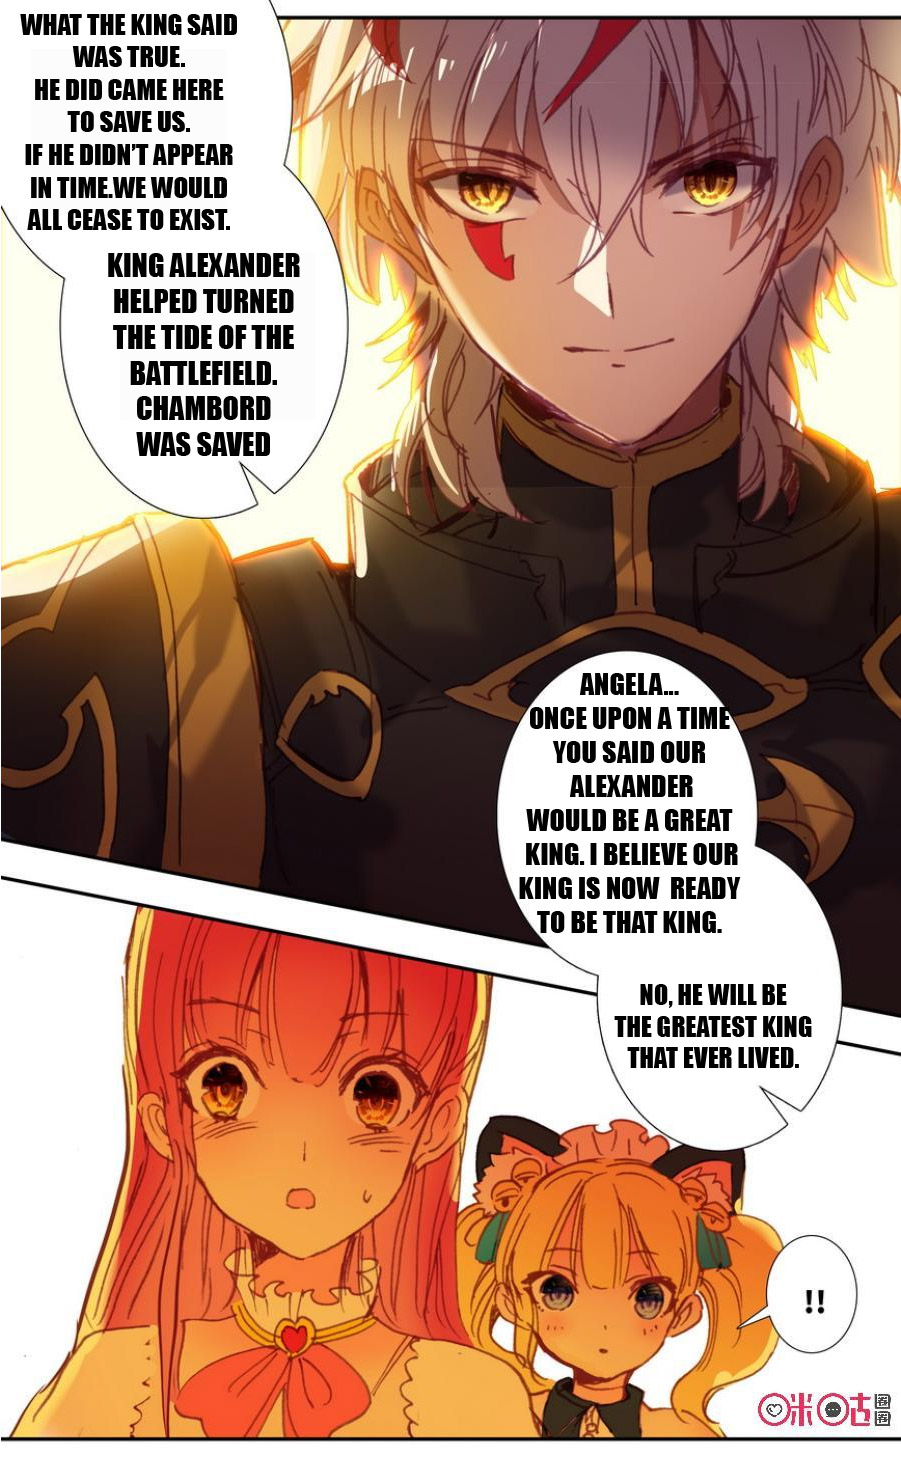 Long Live The King Ch. 19